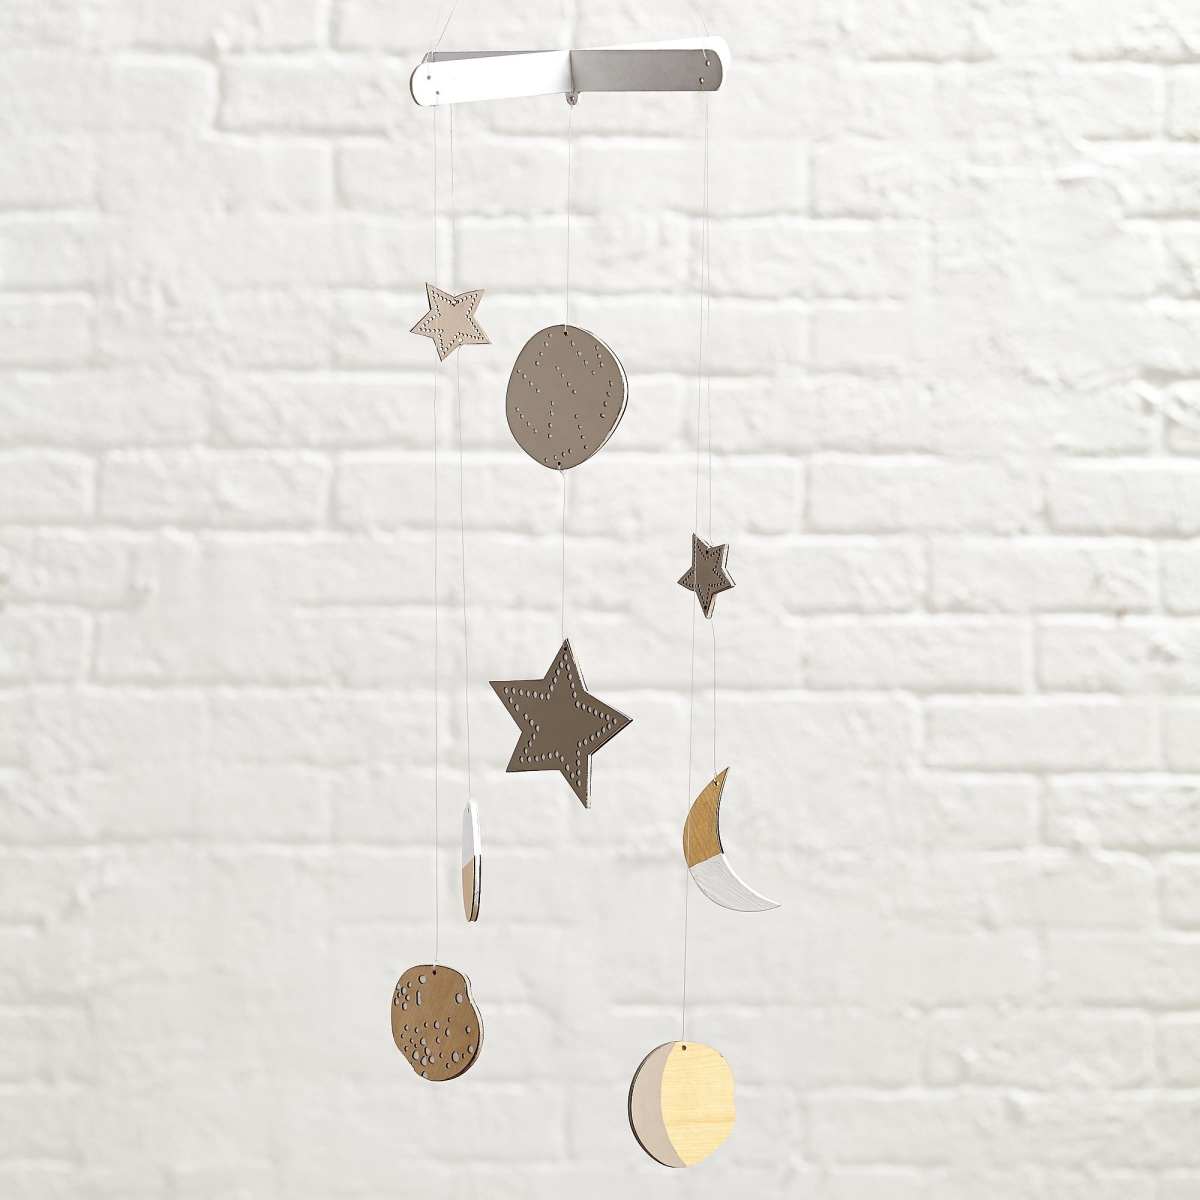 Wooden celestial mobile from The Land of Nod